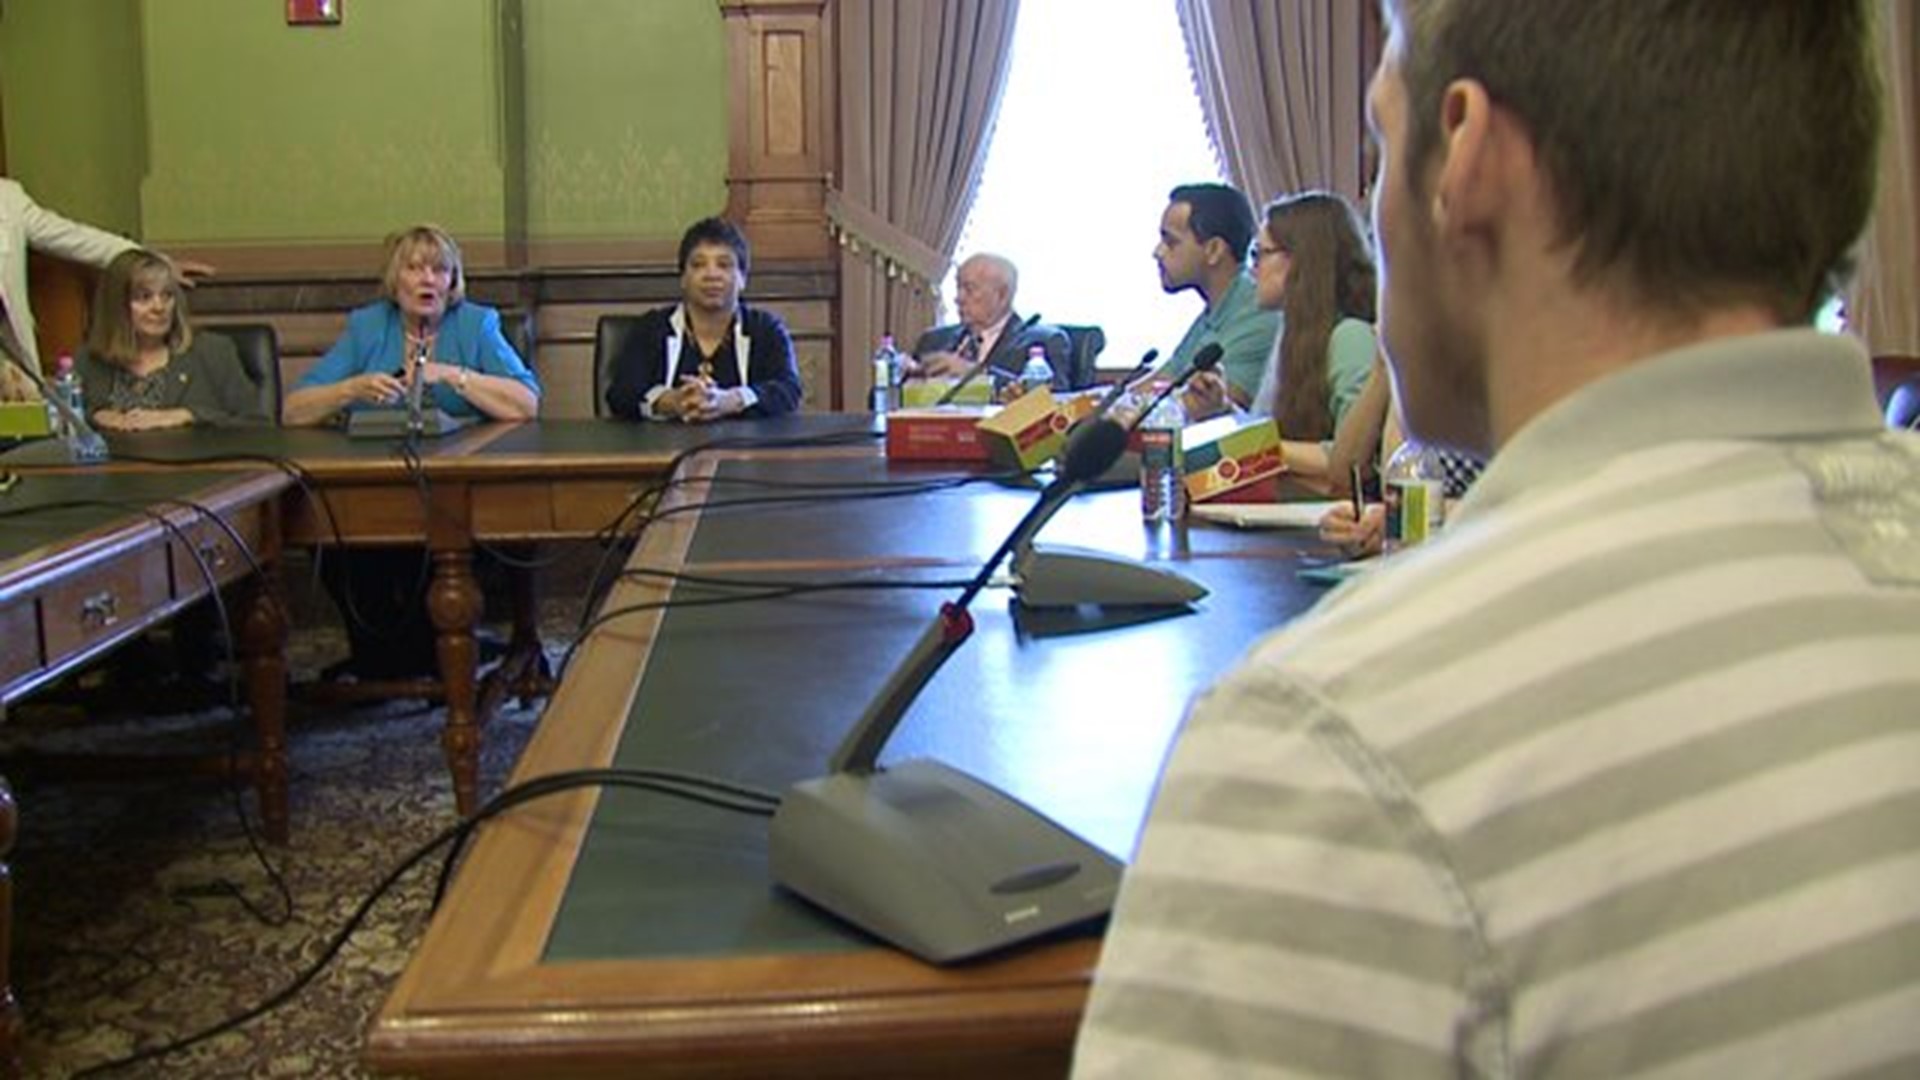 Davenport students ask lawmakers about school funding